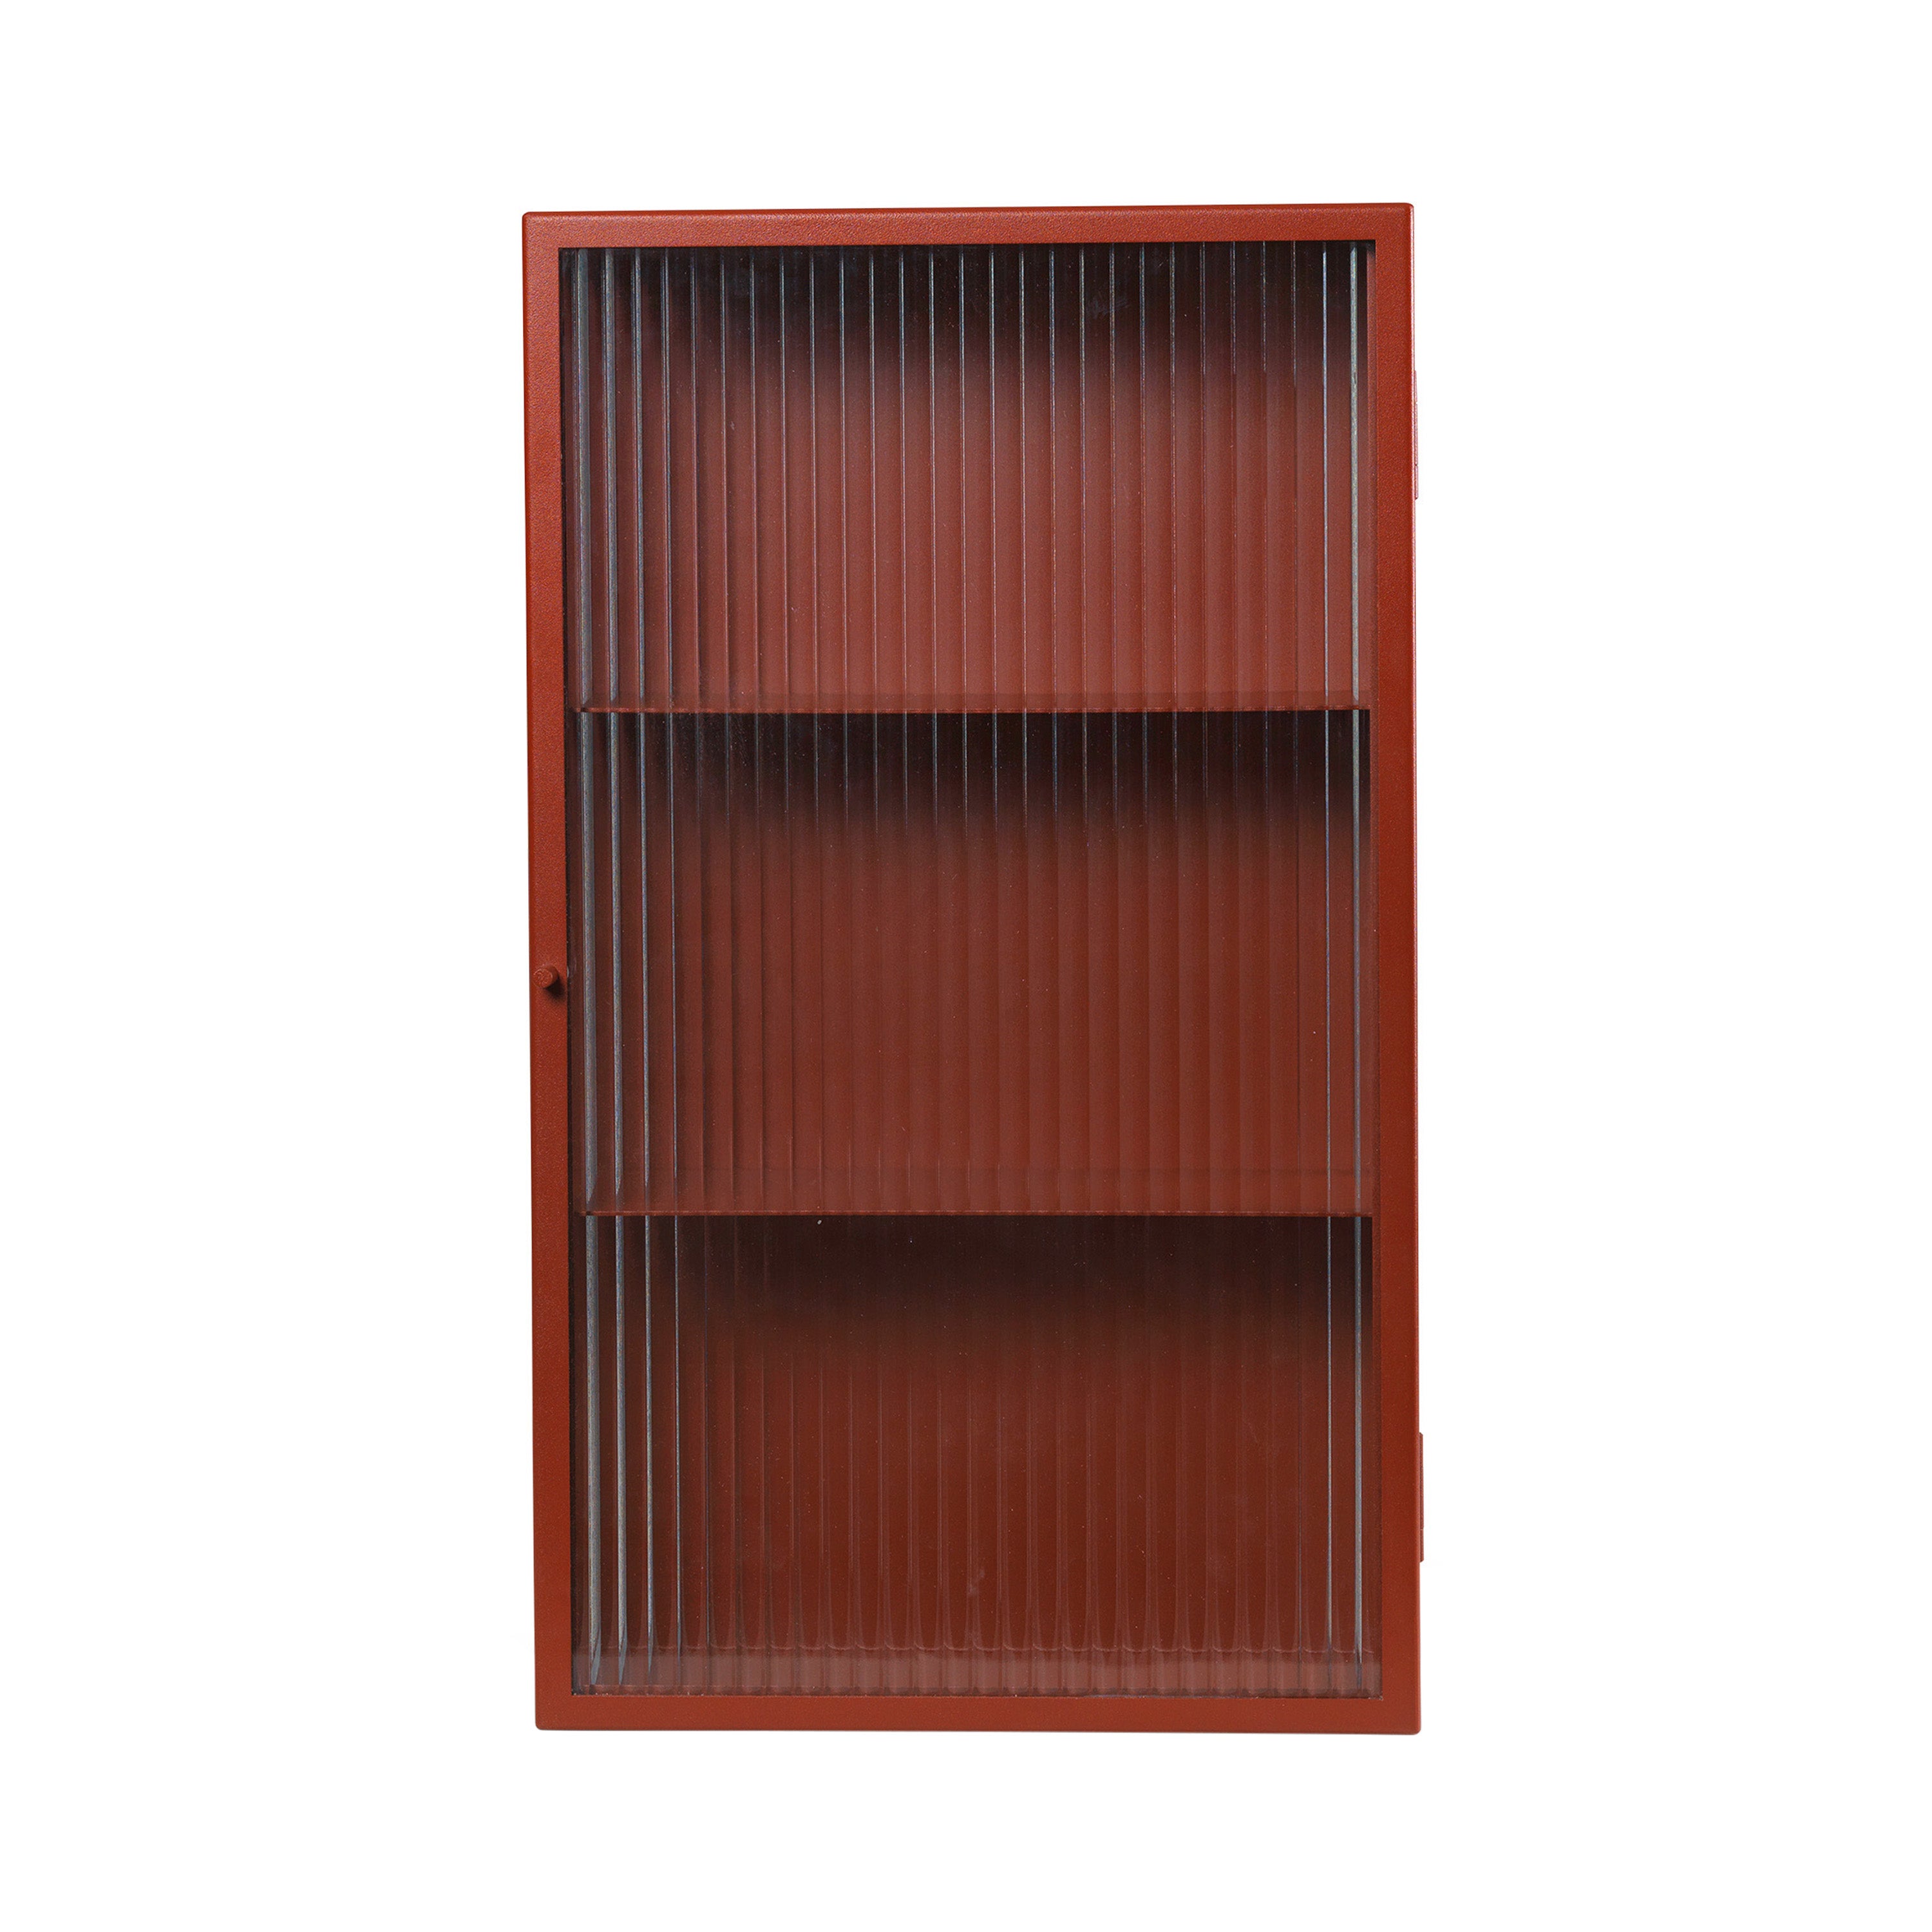 Haze Wall Cabinet: Oxide Red